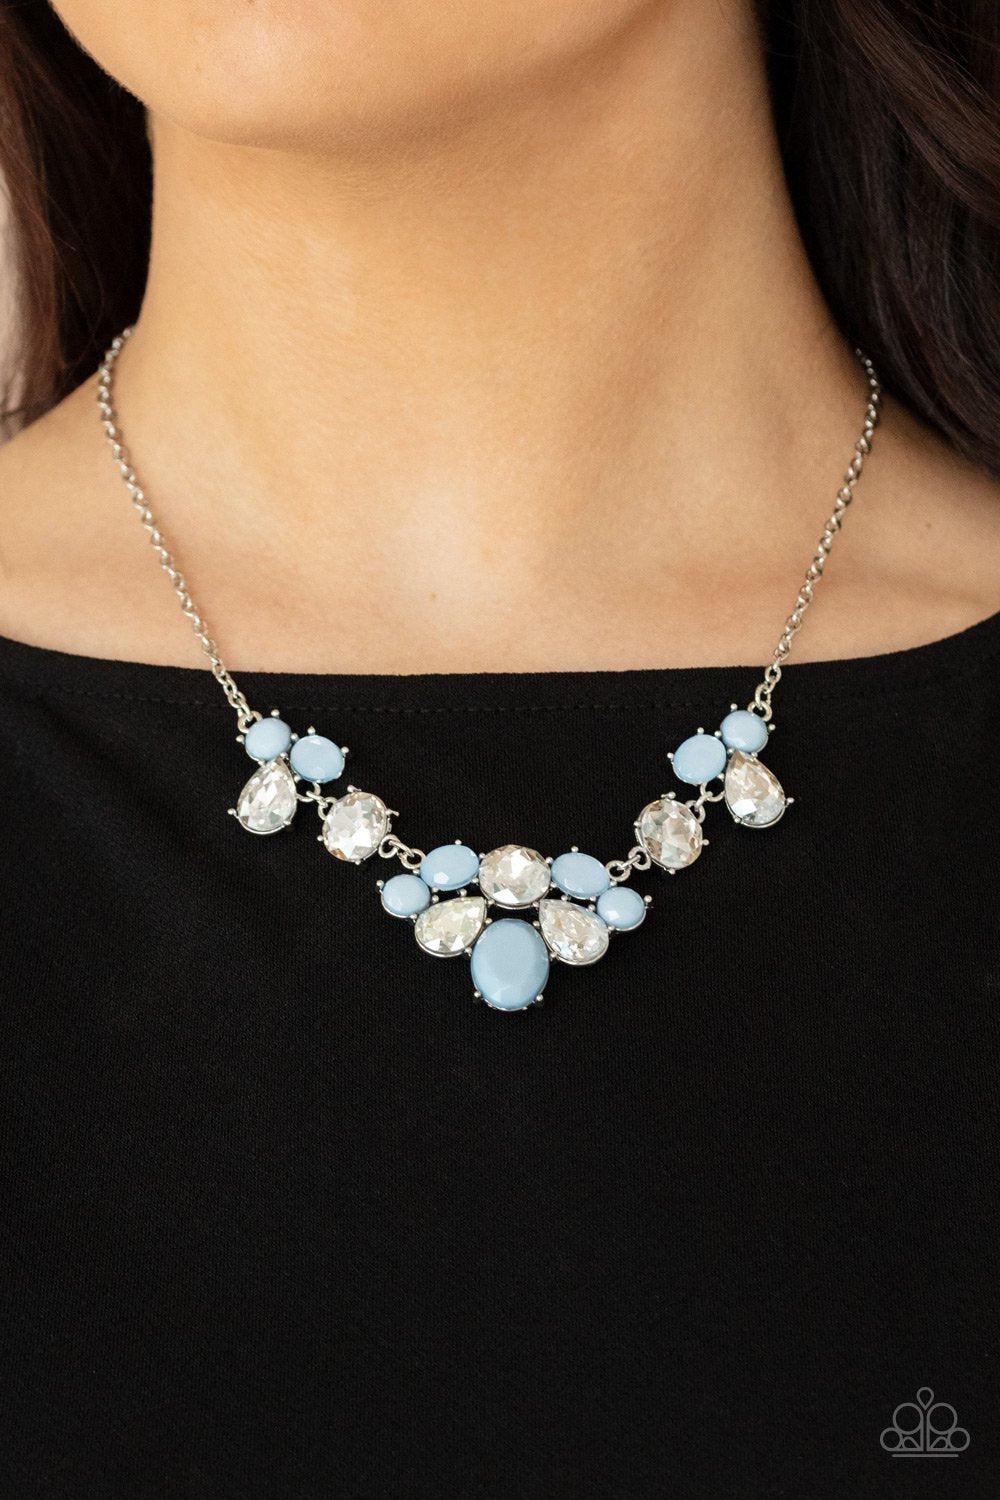 Ethereal Romance Blue and White Rhinestone Necklace - Paparazzi Accessories- model - CarasShop.com - $5 Jewelry by Cara Jewels